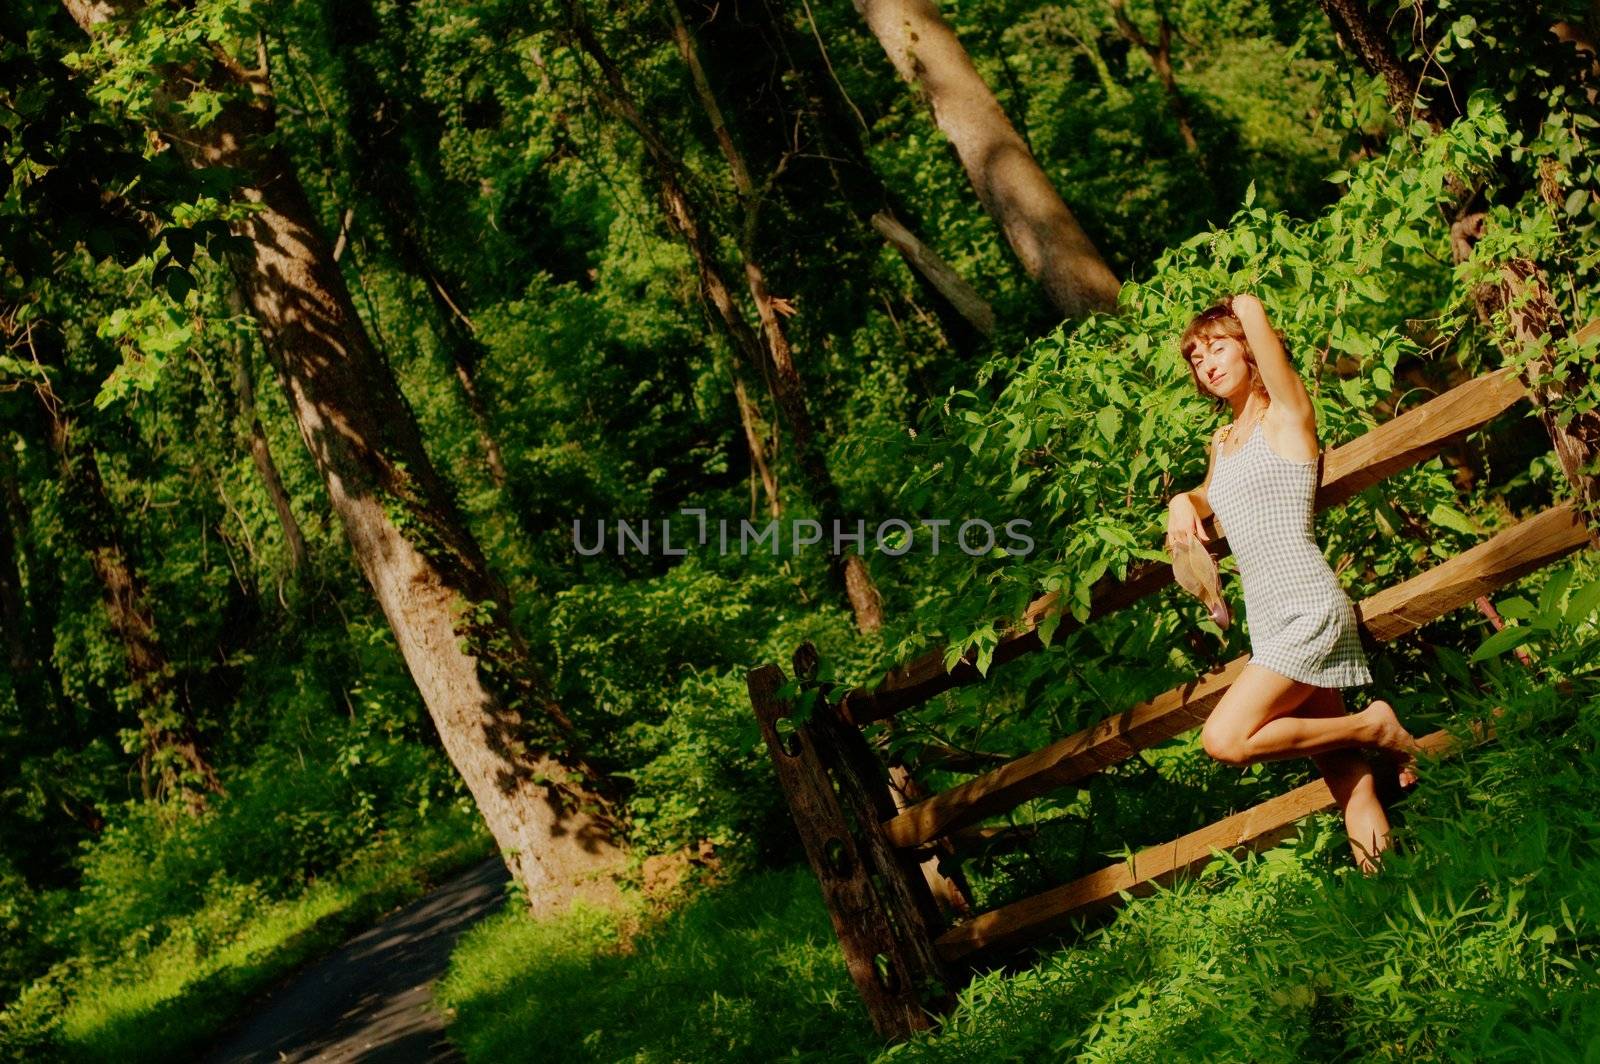 Pretty girl leaning against fence in woods.